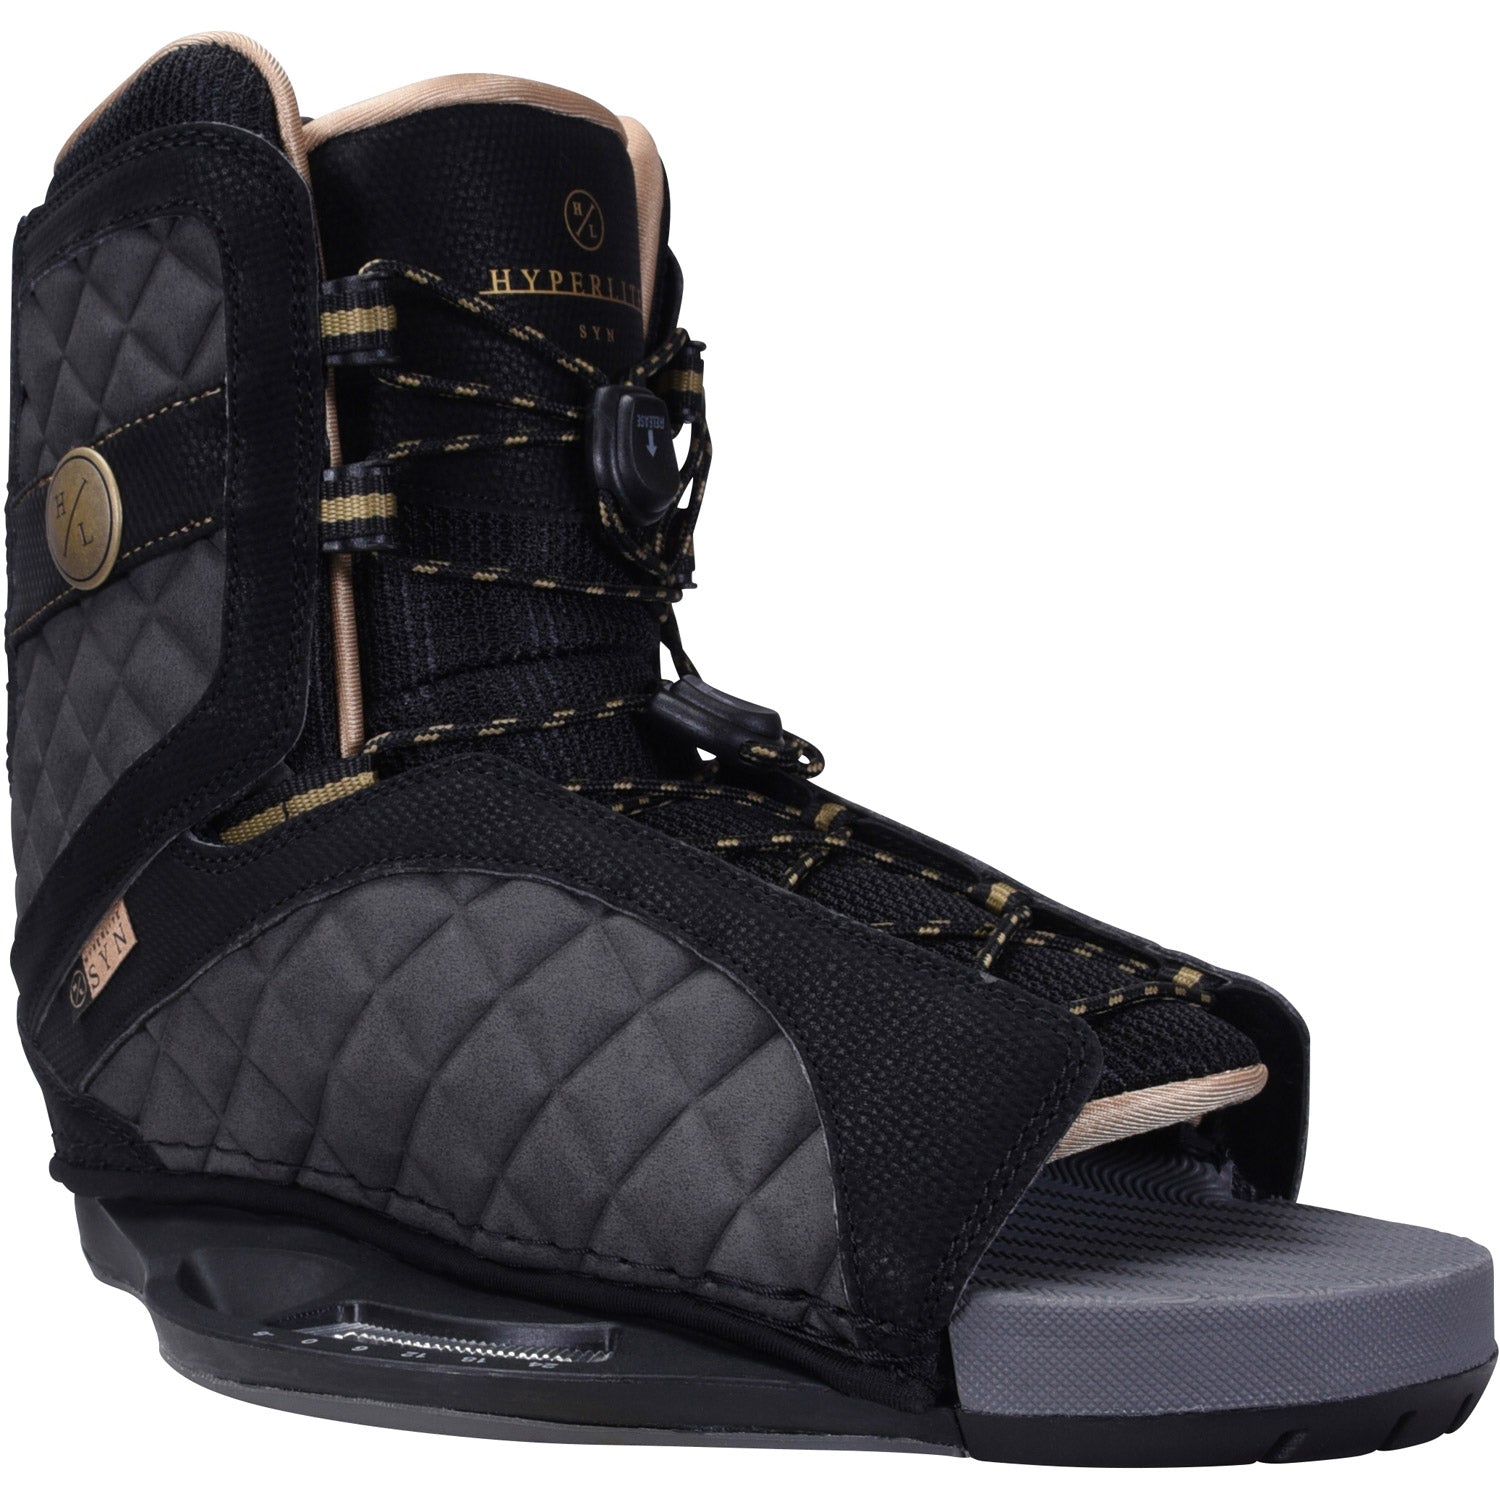 Syn OT Wakeboard Boots